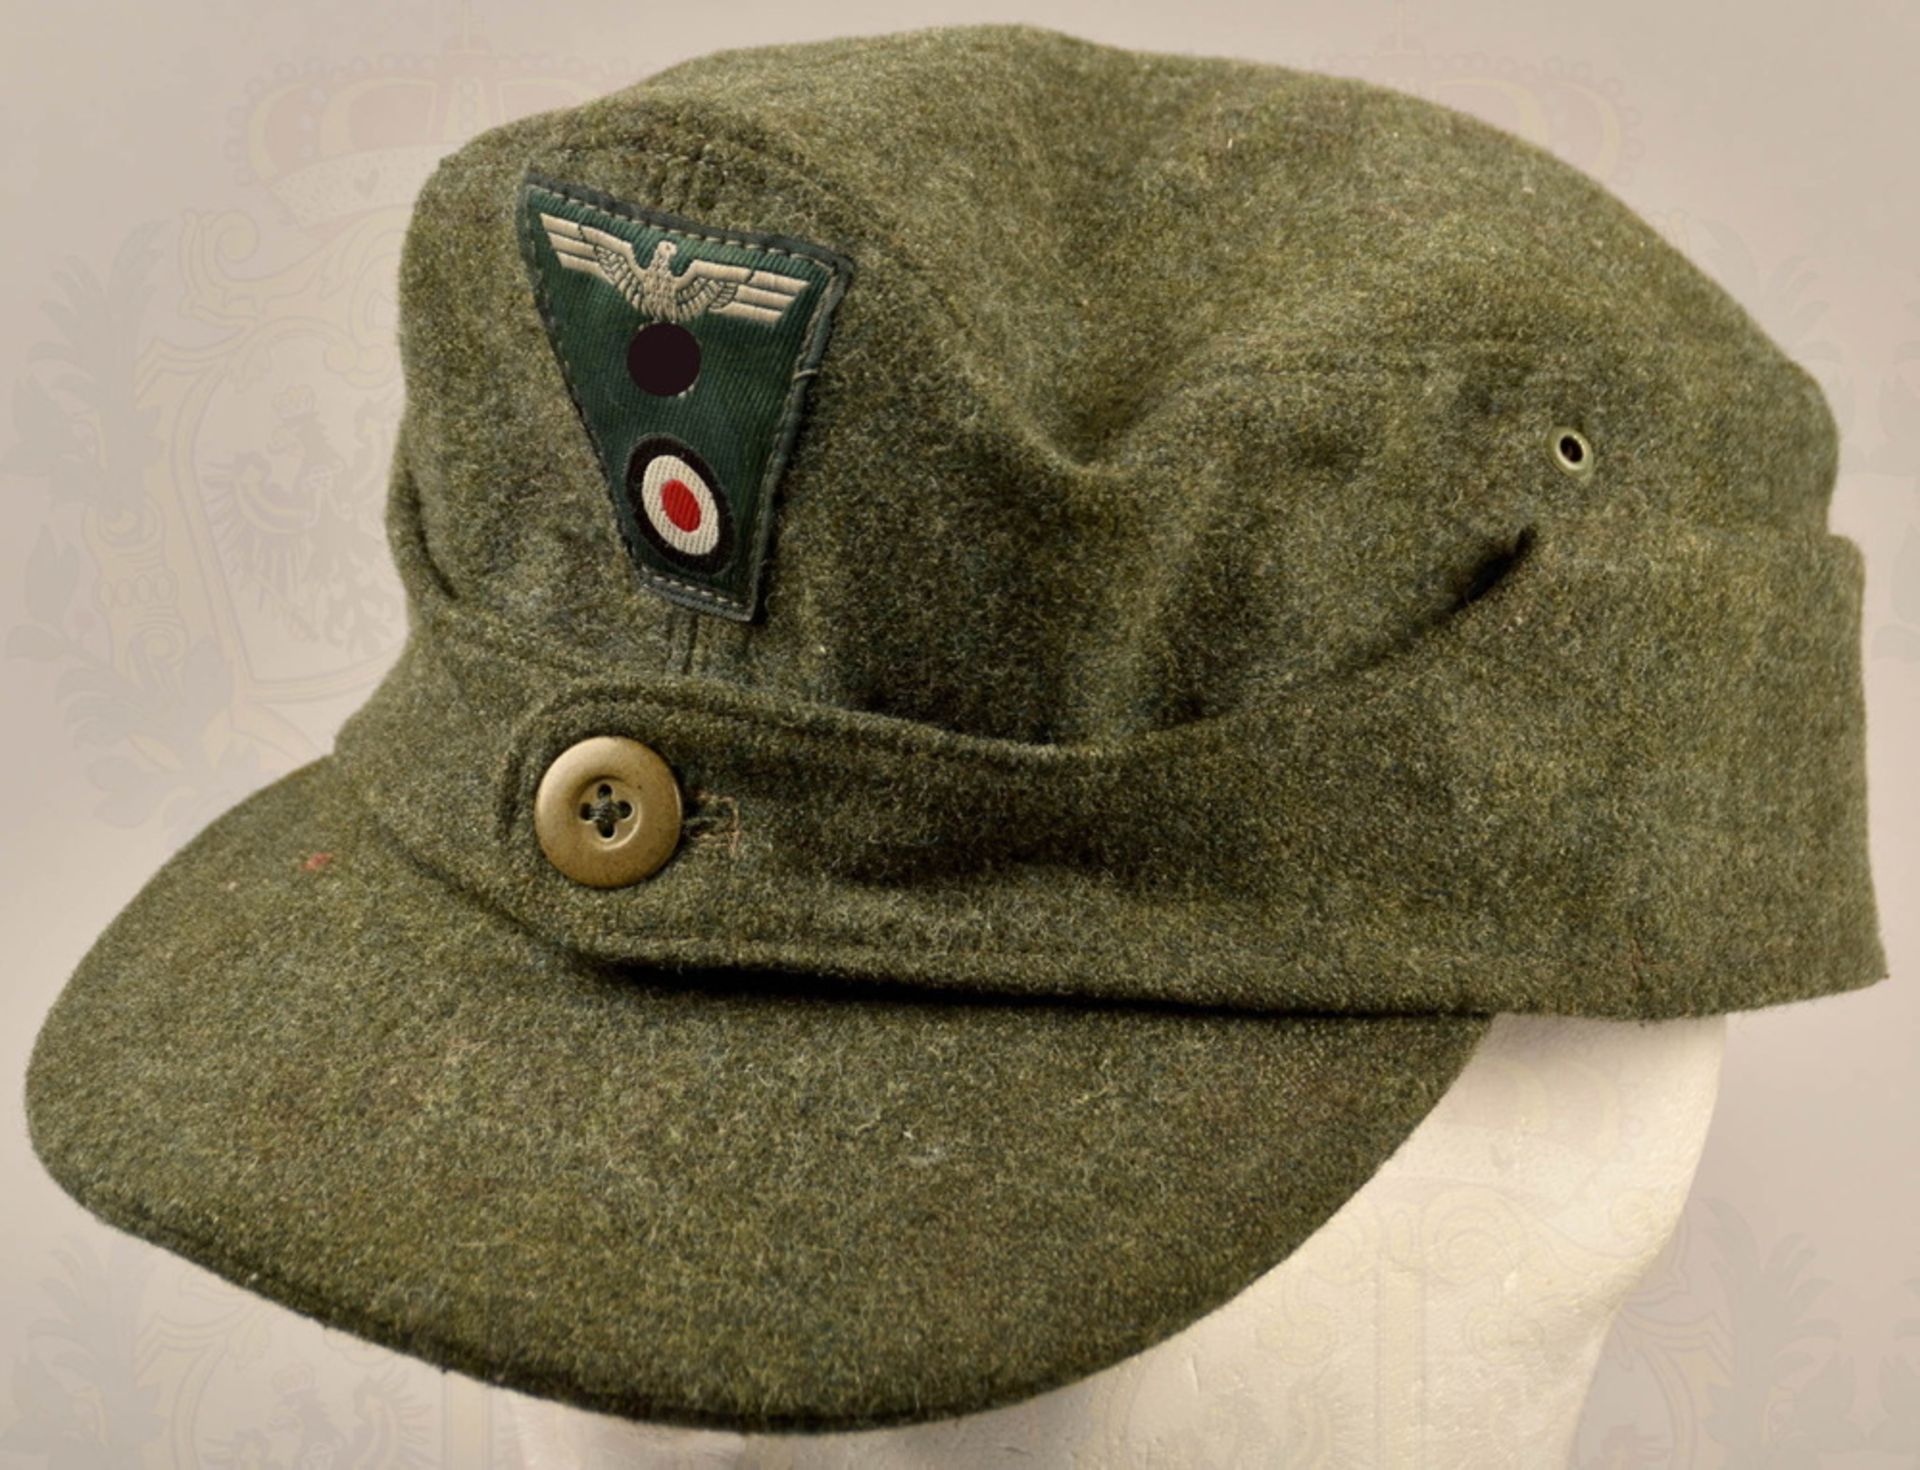 Forage cap for German Army enlisted men